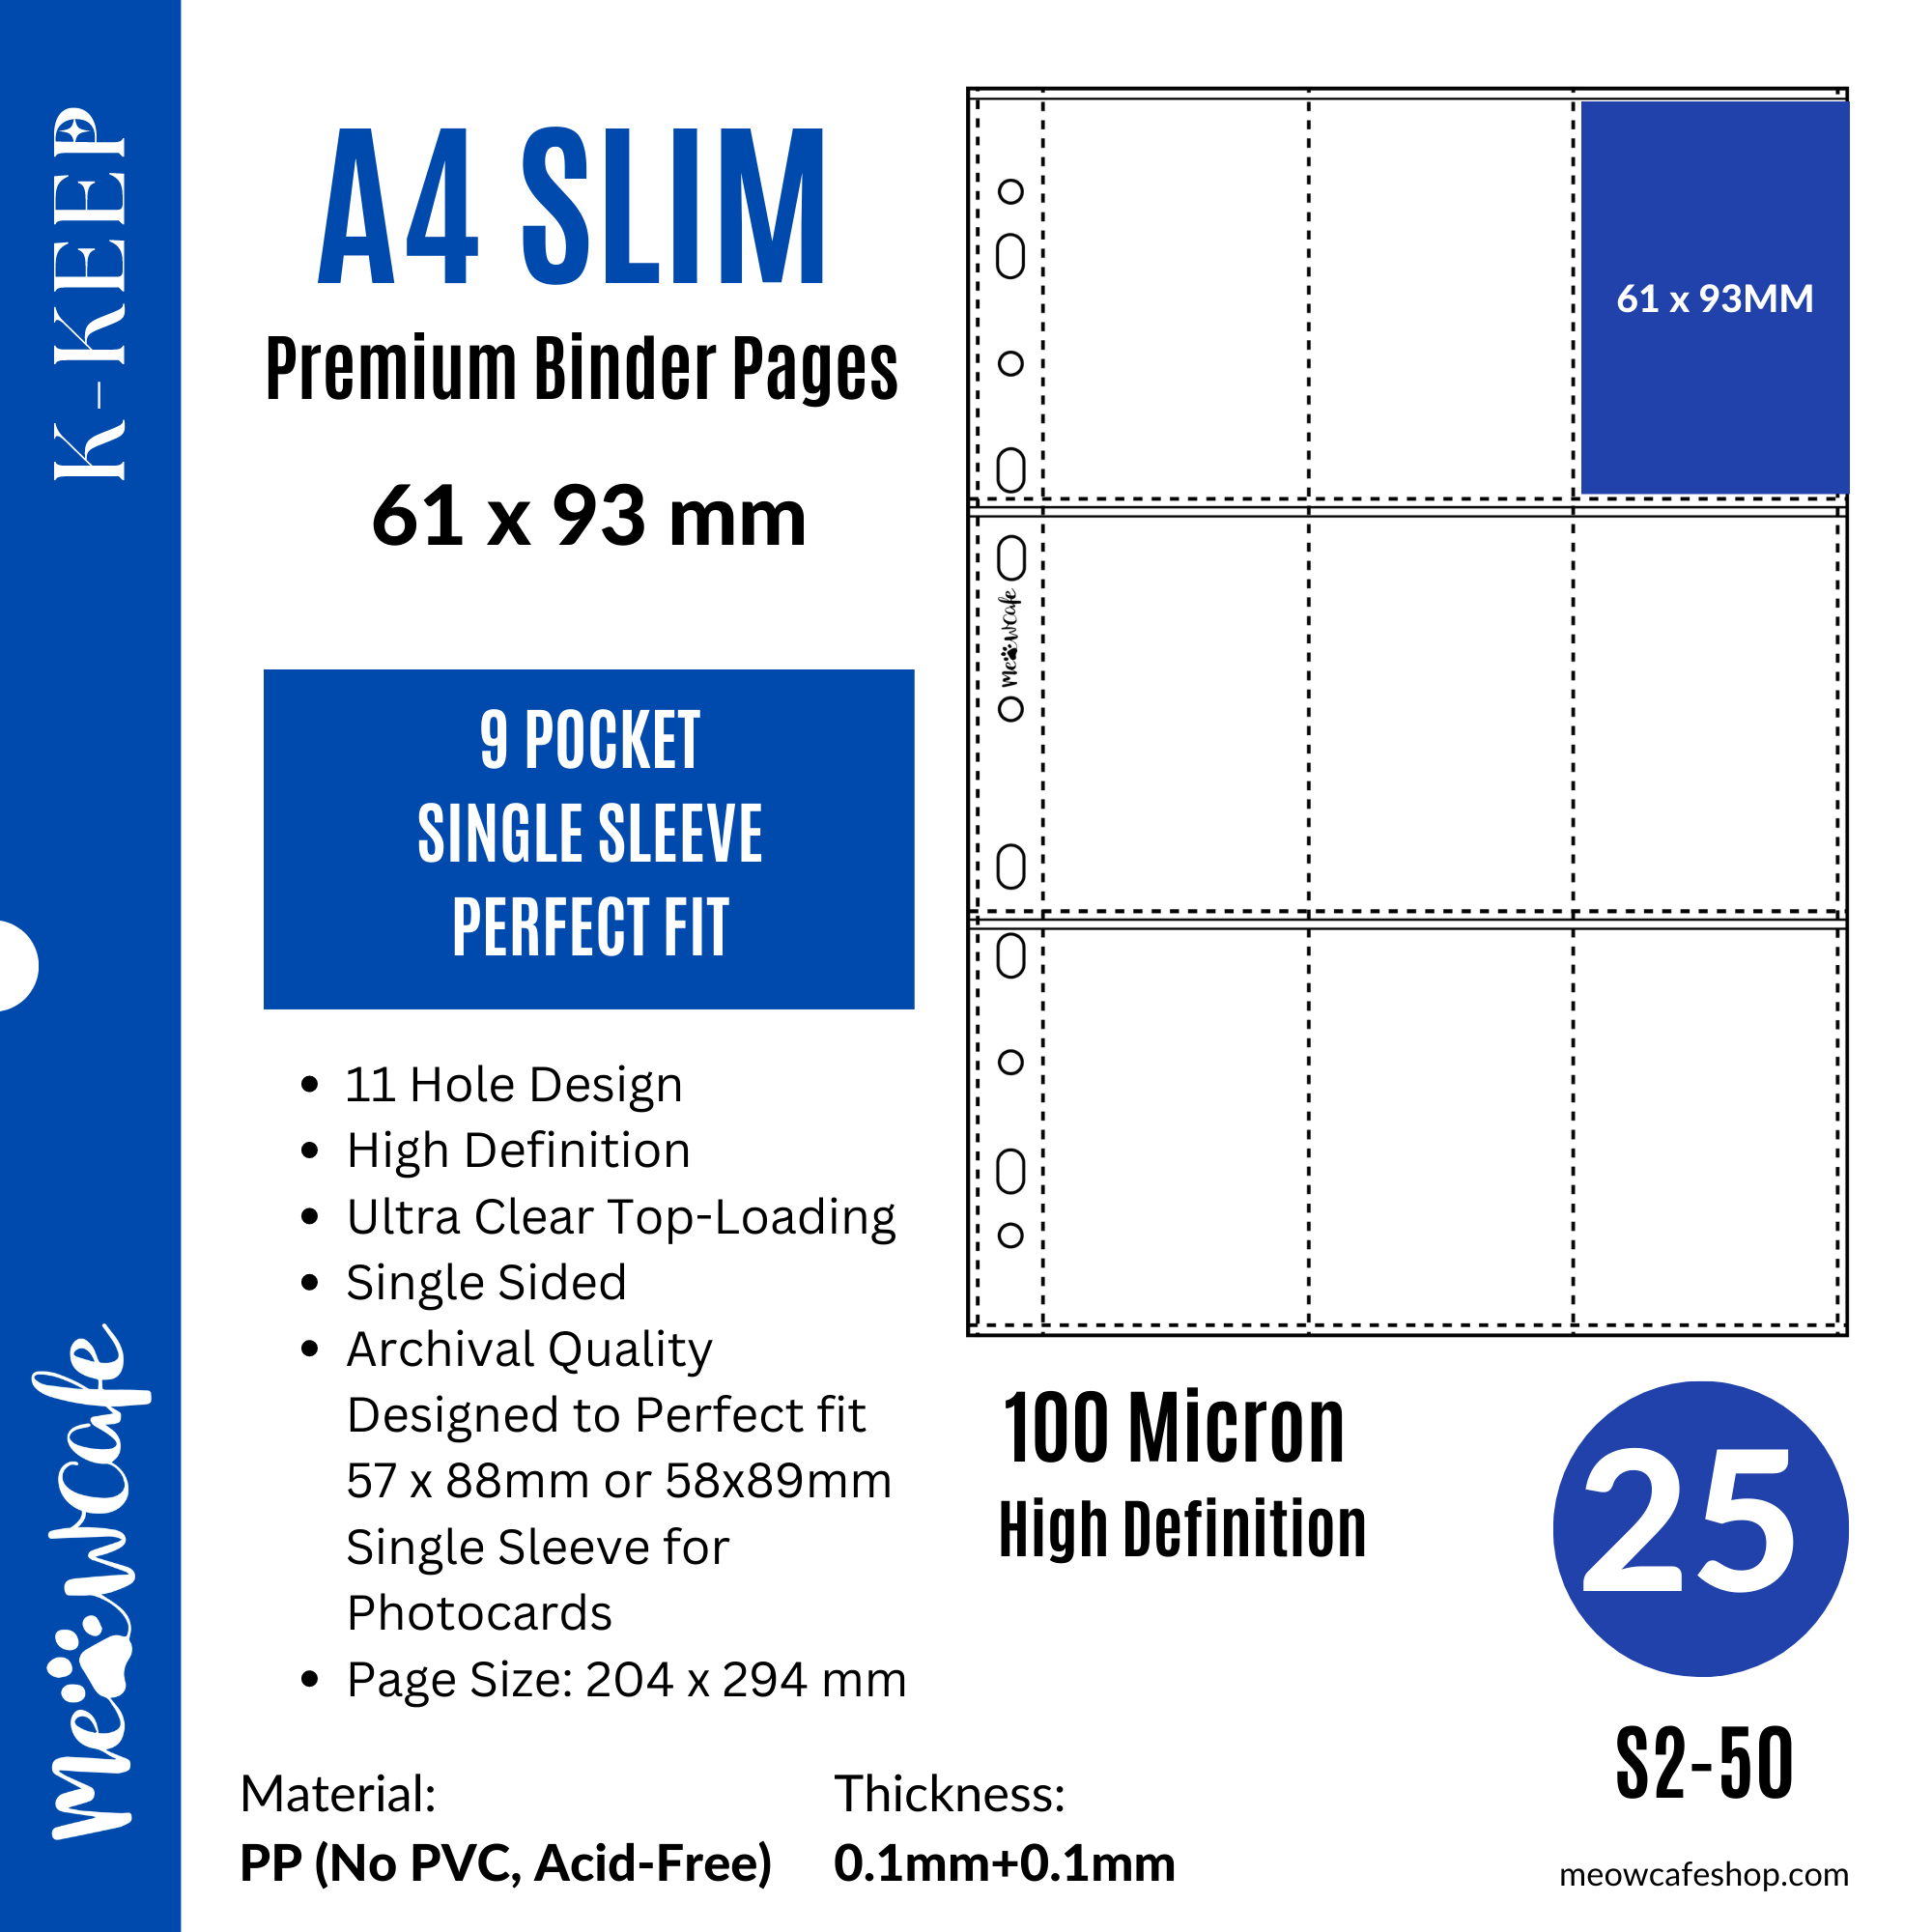 K-KEEP [A4 Slim] - 9 Pocket (61x93mm) Perfect Fit 59.5x91mm Double Sleeve Or 58x89mm Single Sleeve - 11 Holes Premium Binder Pages, 100 Micron Thick, High Definition (Pack of 25) (S2-50)